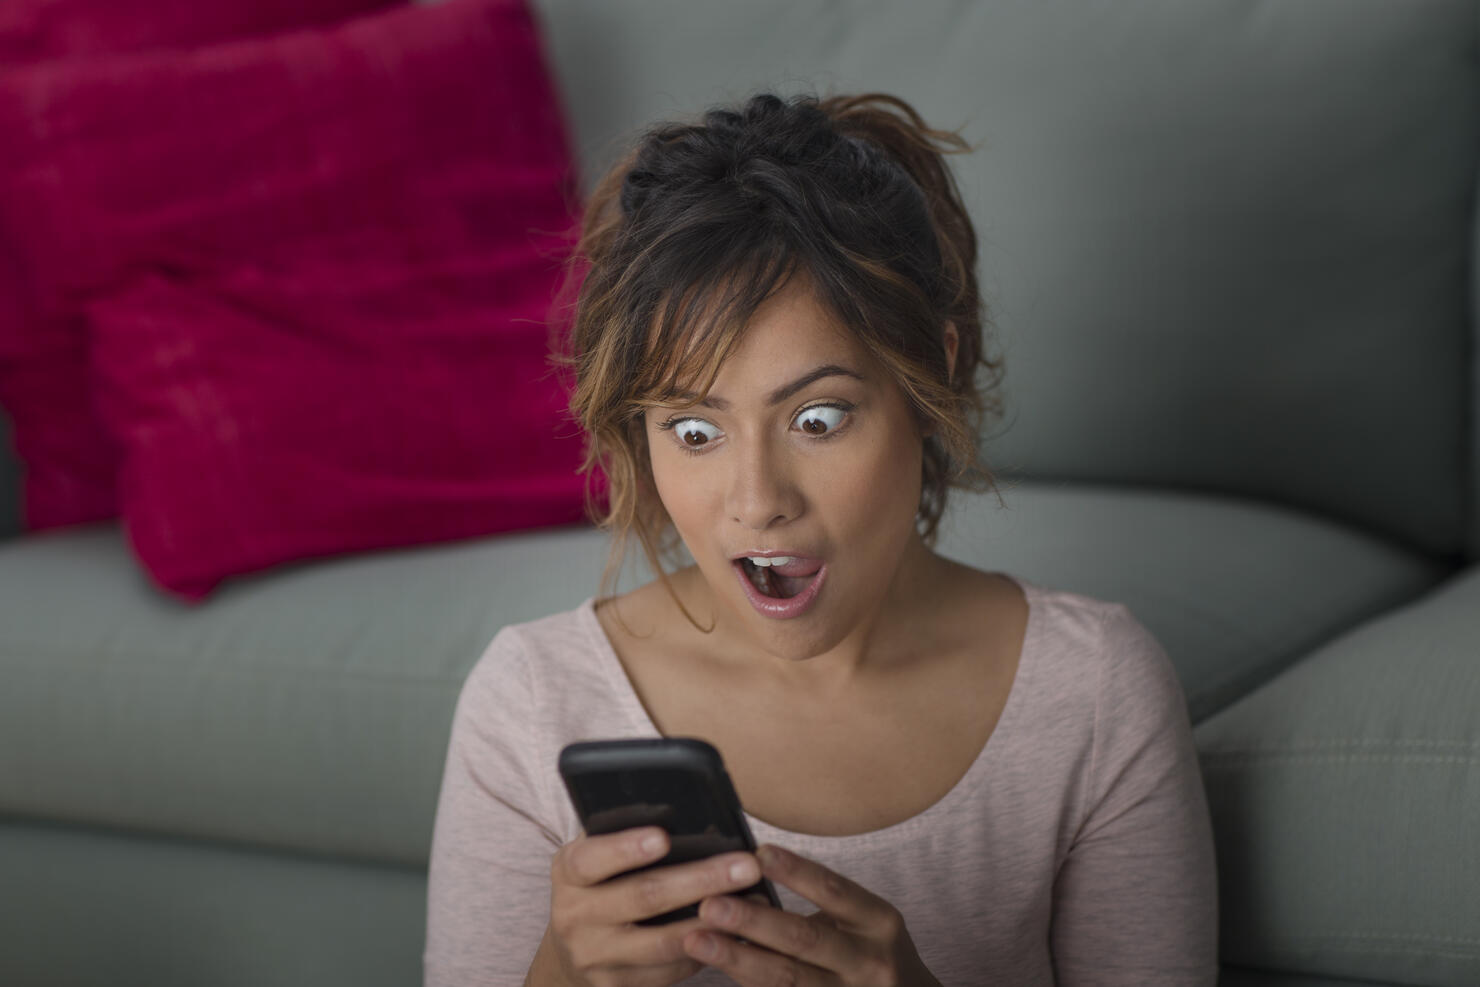 Woman surprised at message on smartphone